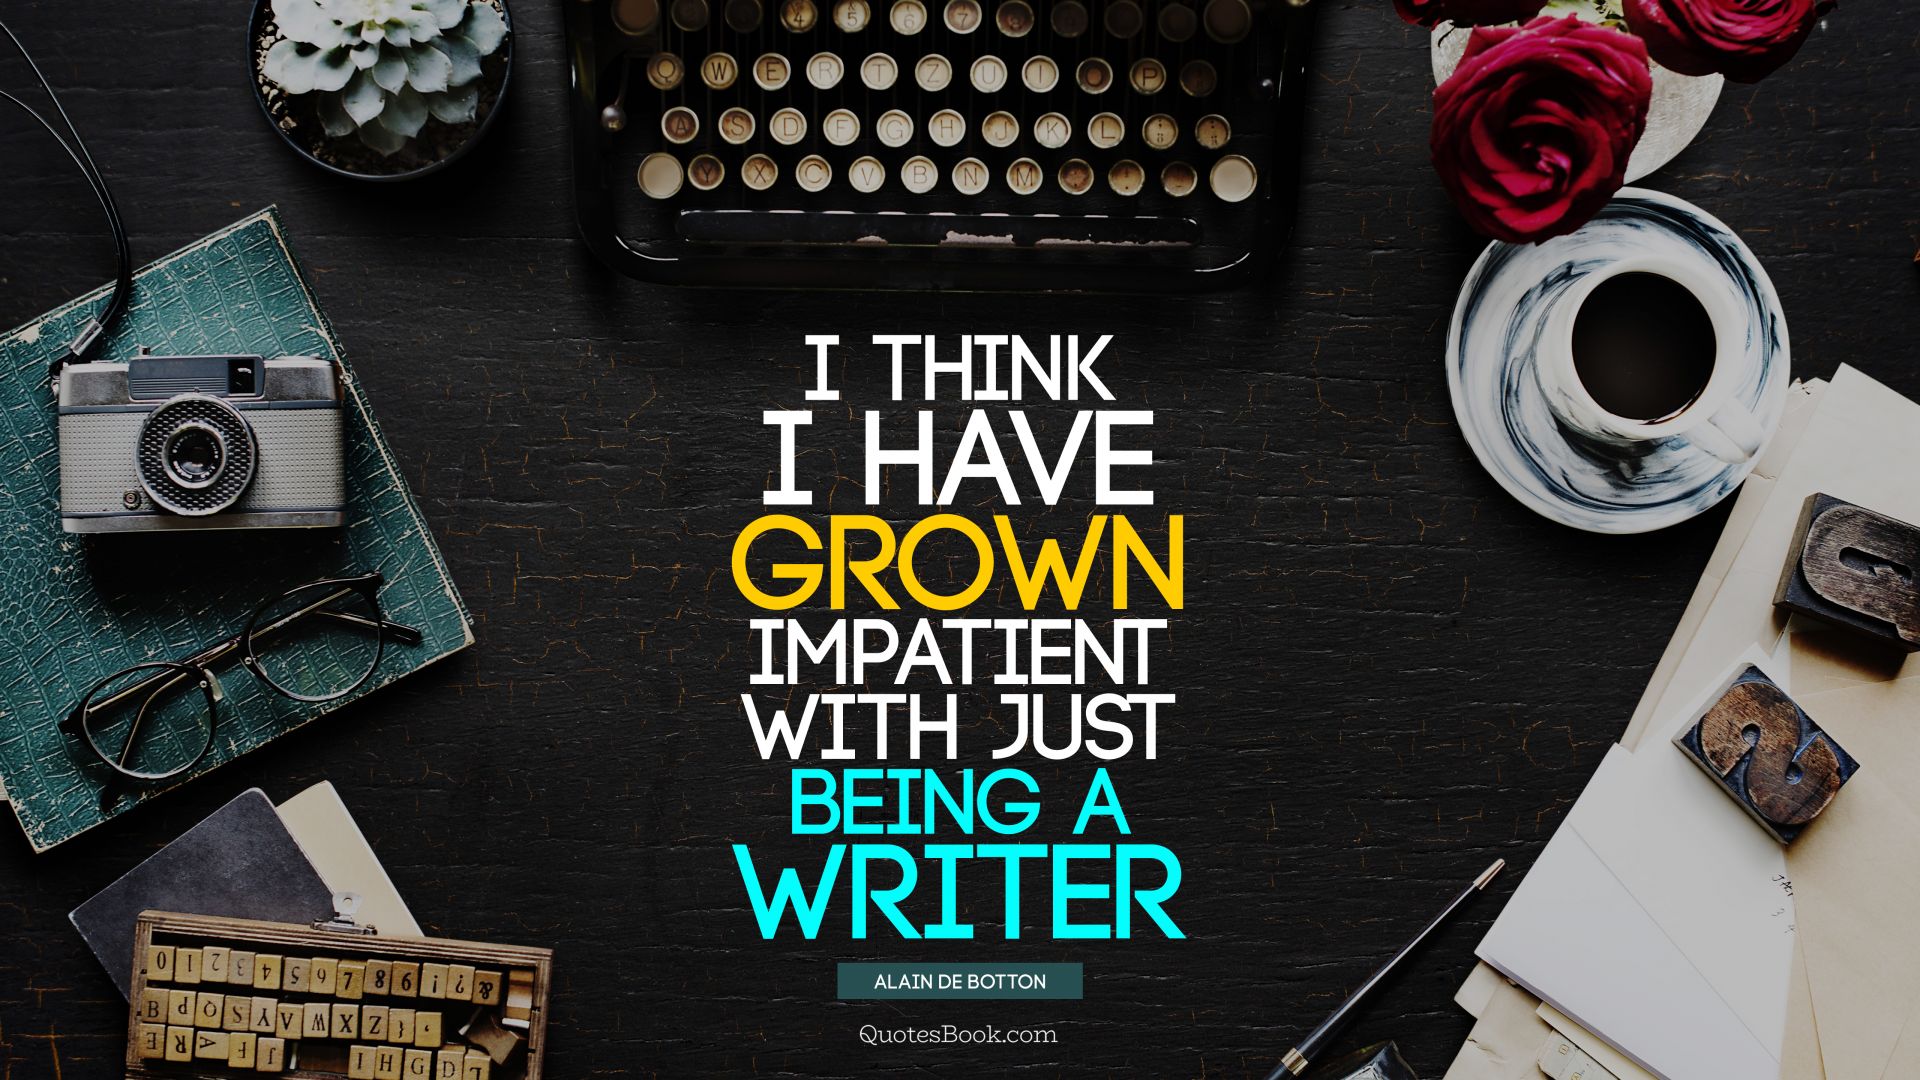 I think I have grown impatient with just being a writer. - Quote by Alain de Botton